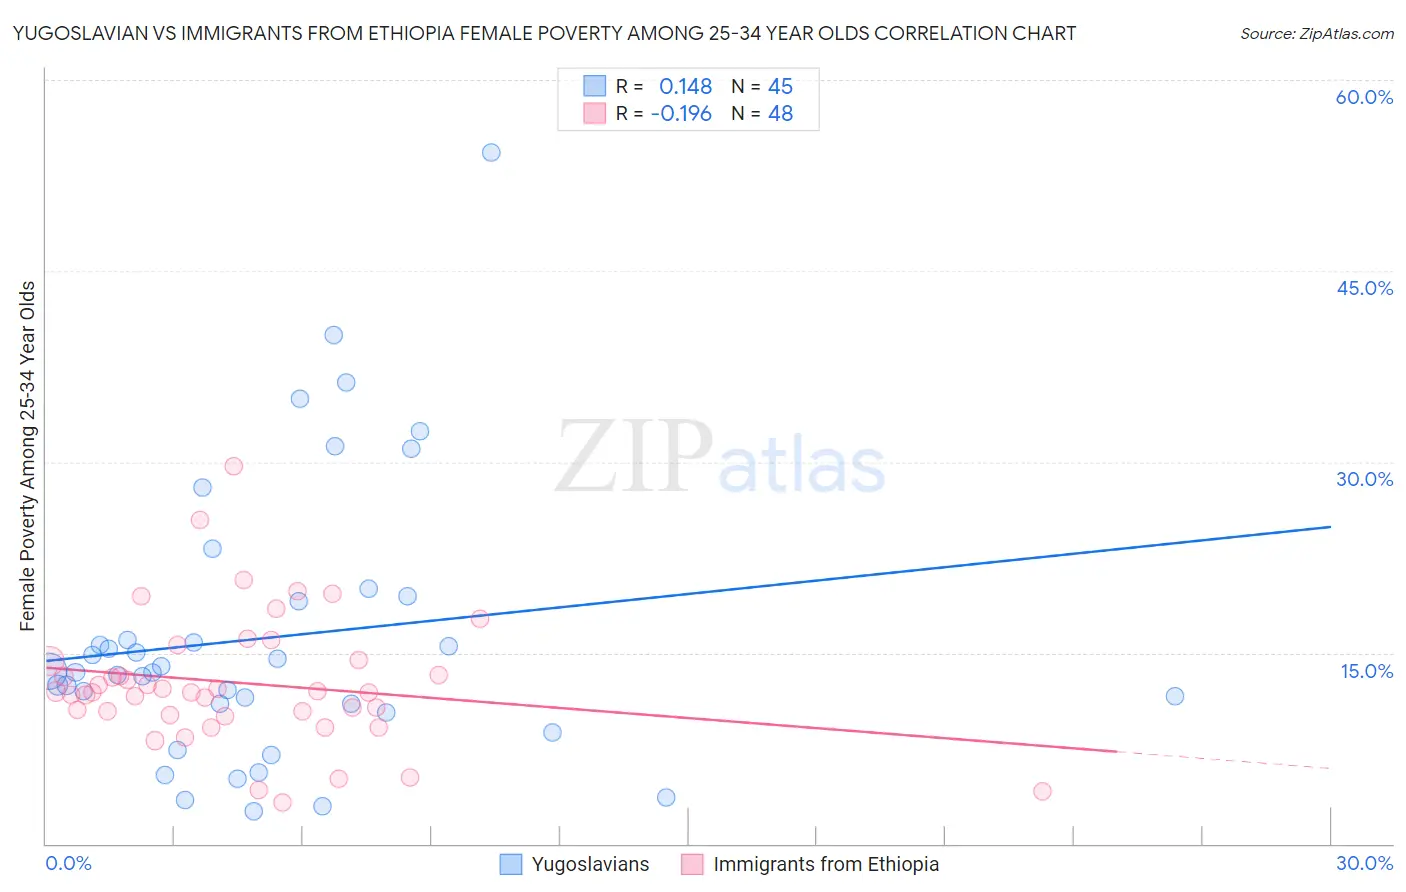 Yugoslavian vs Immigrants from Ethiopia Female Poverty Among 25-34 Year Olds